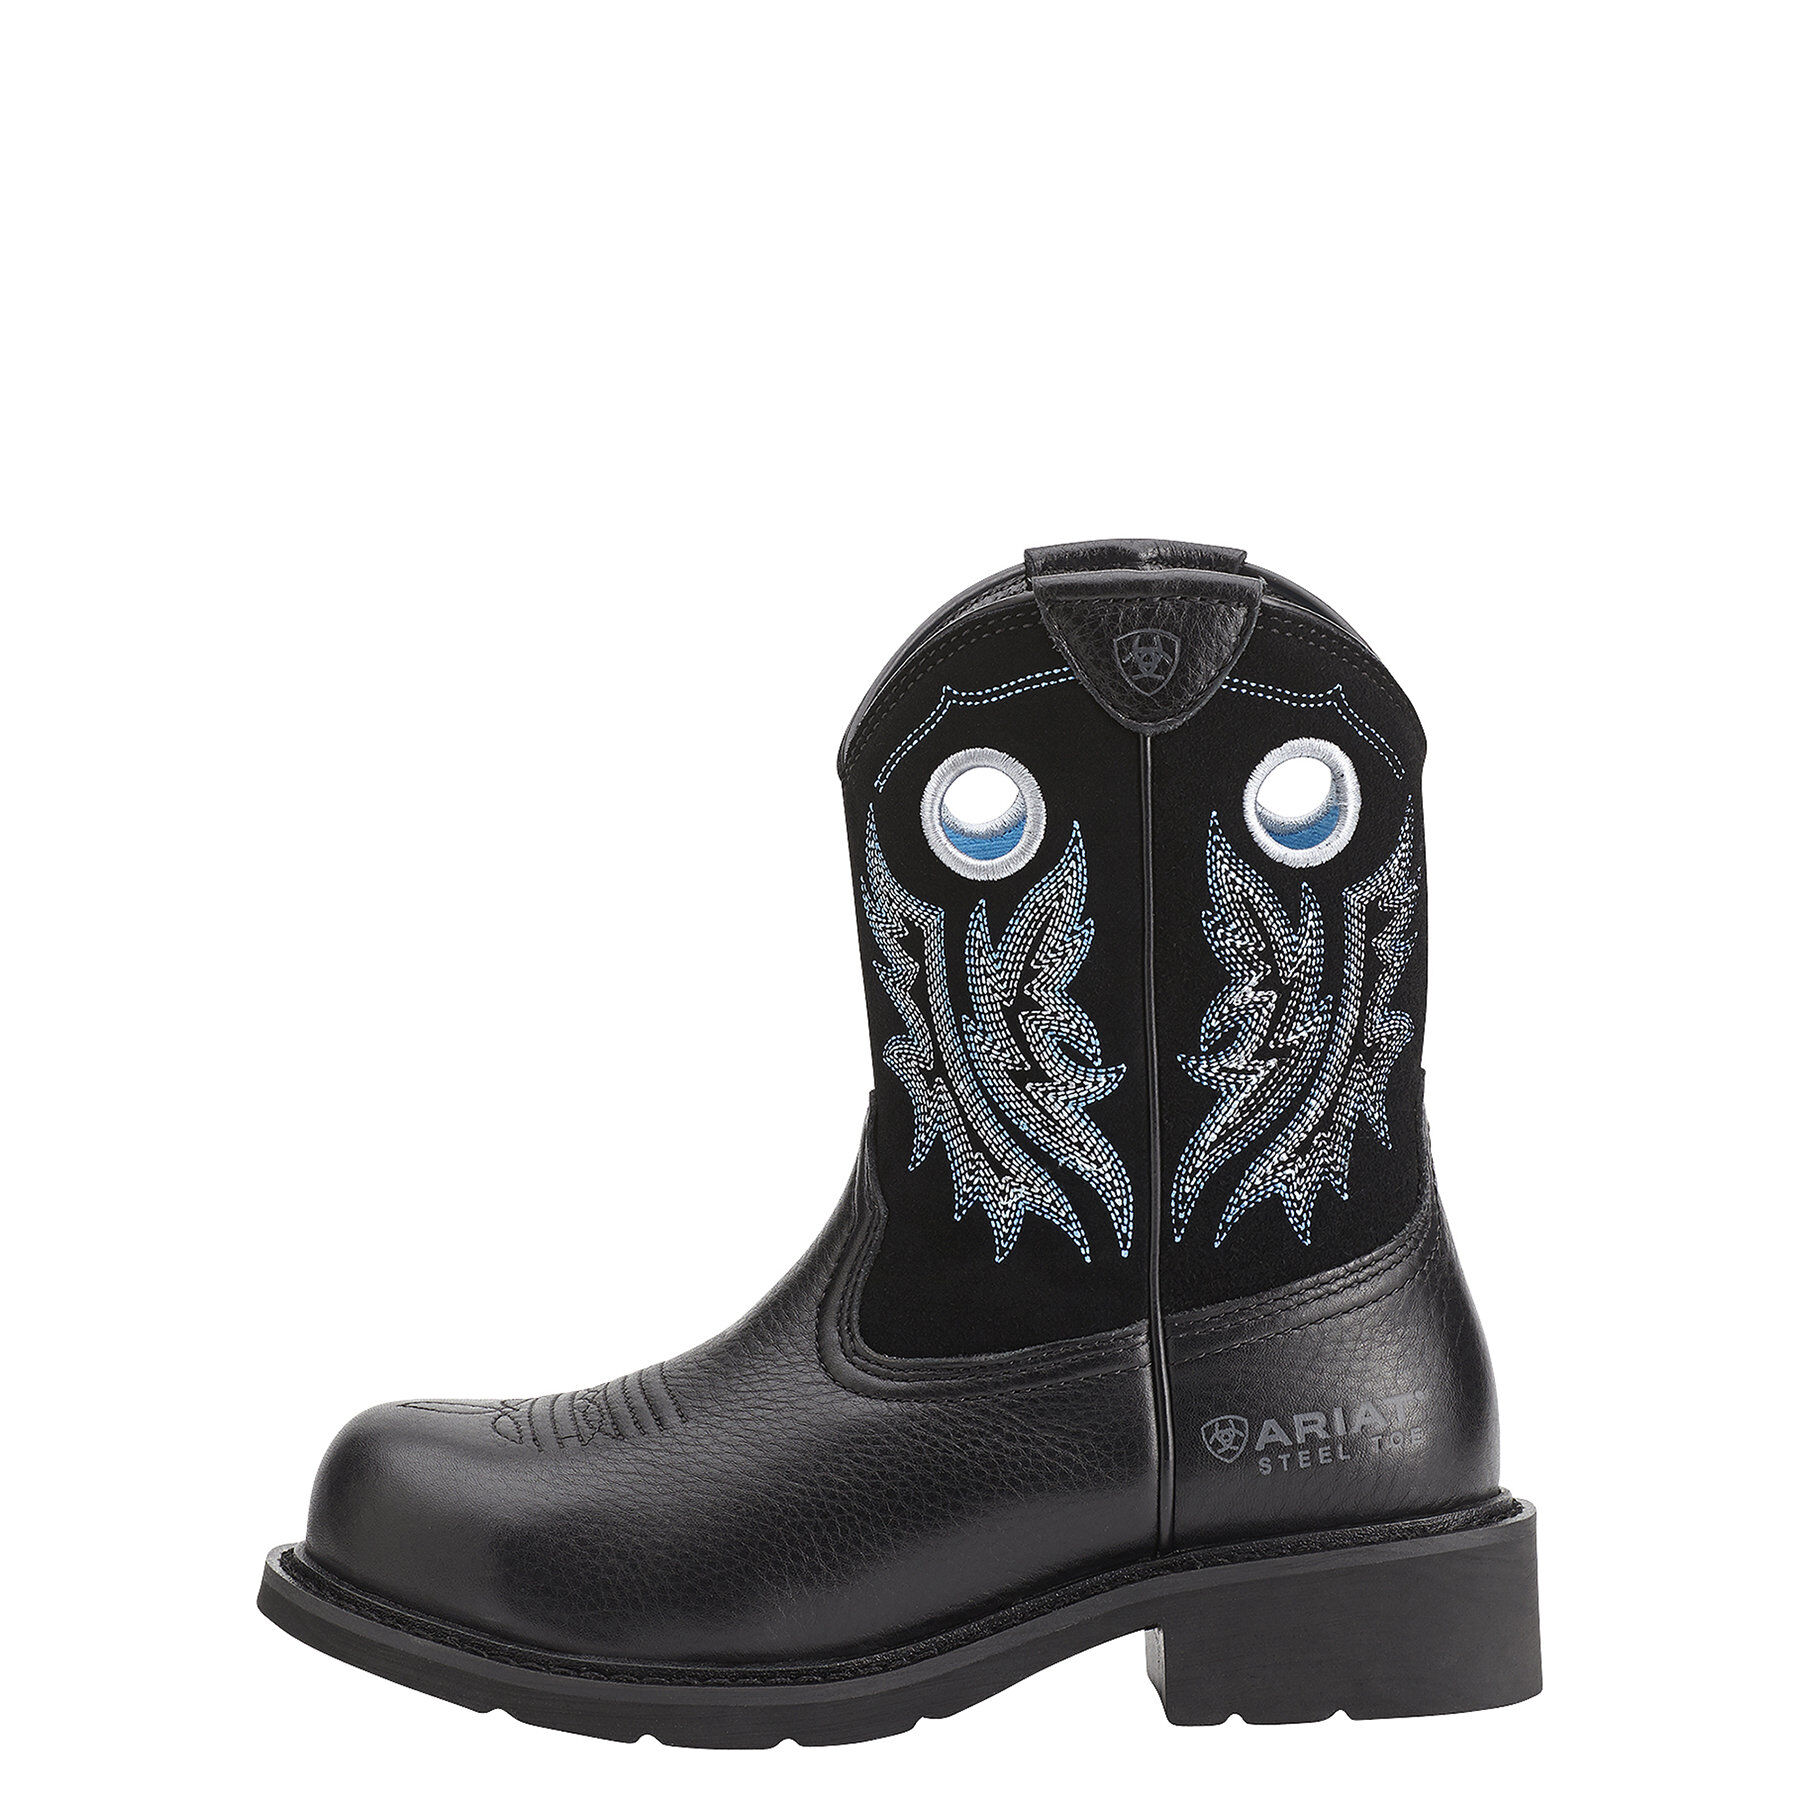 Fatbaby Cowgirl Steel Toe Work Boot | Ariat